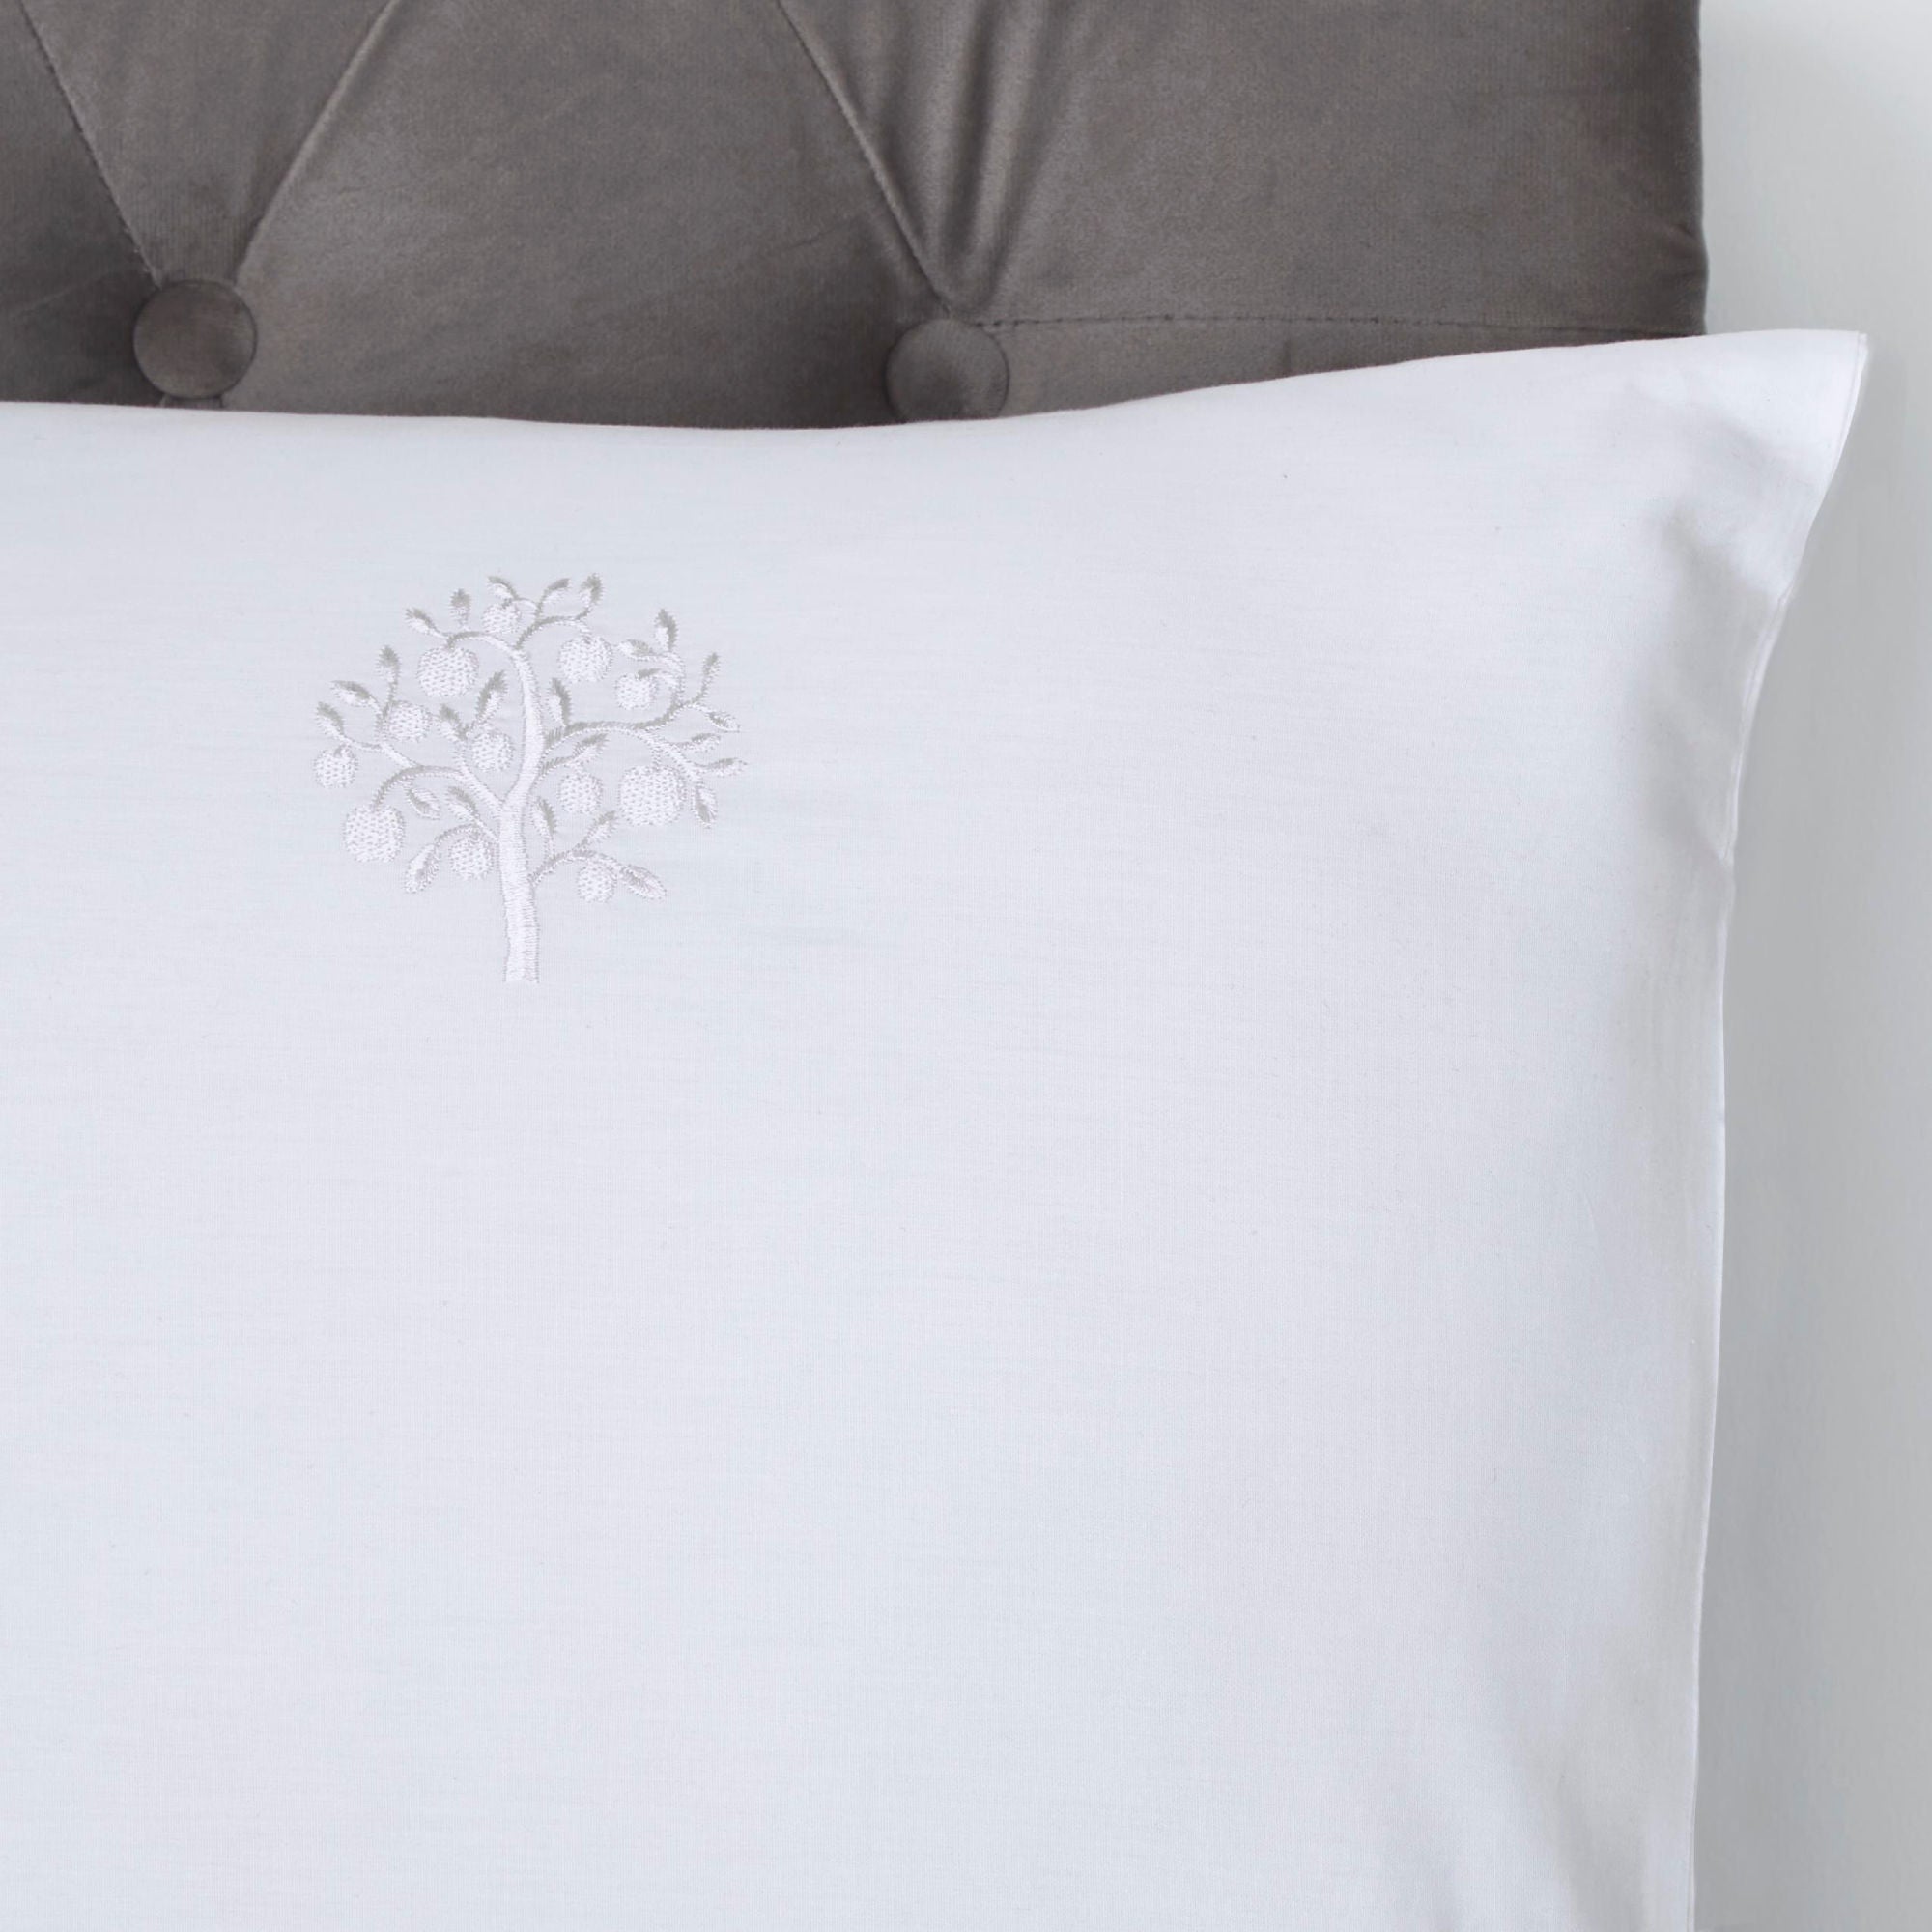 Embroidered Trees Duvet Cover Set by Appletree Boutique in White - Duvet Cover Set - Appletree Boutique